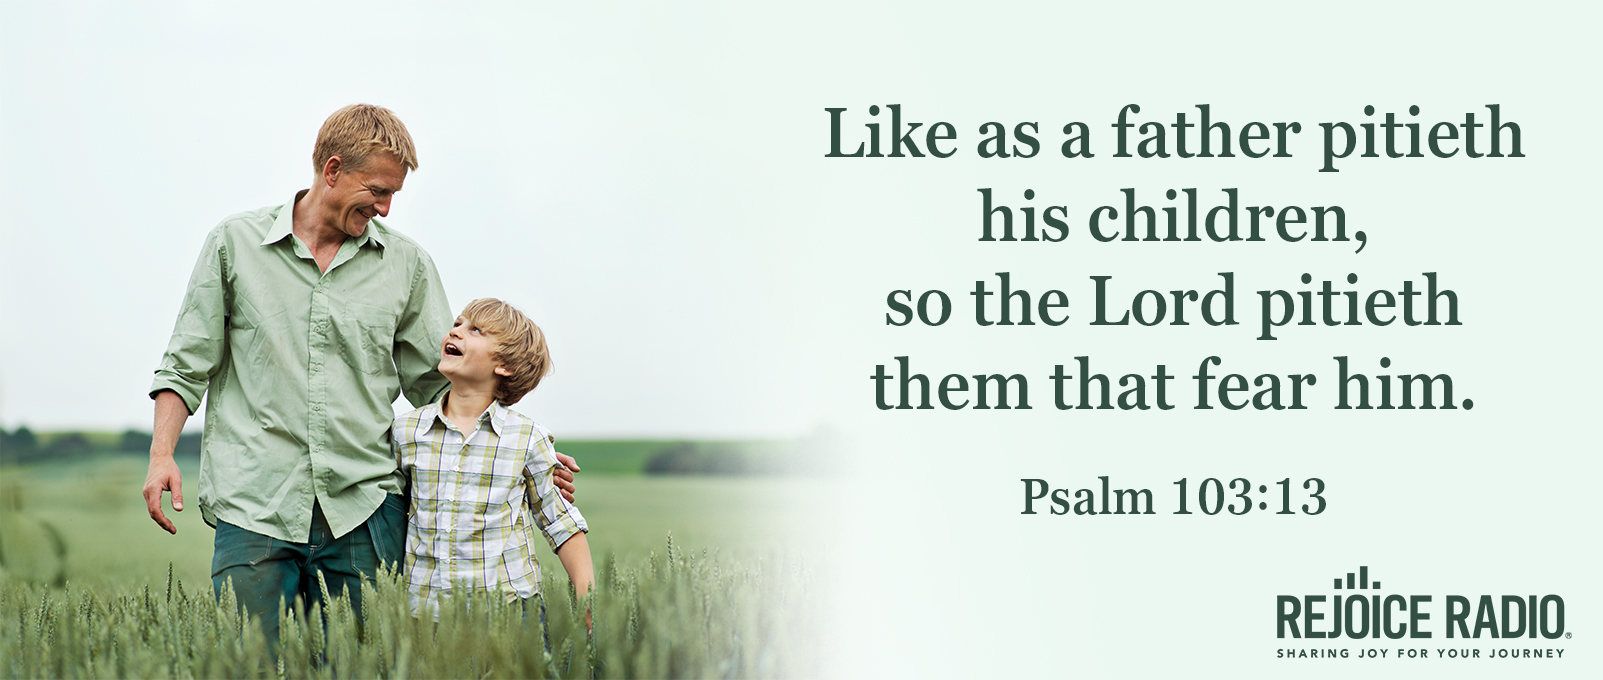 June 1-30 verse slider - Like as a father pitieth his children, so the Lord pitieth them that fear him.